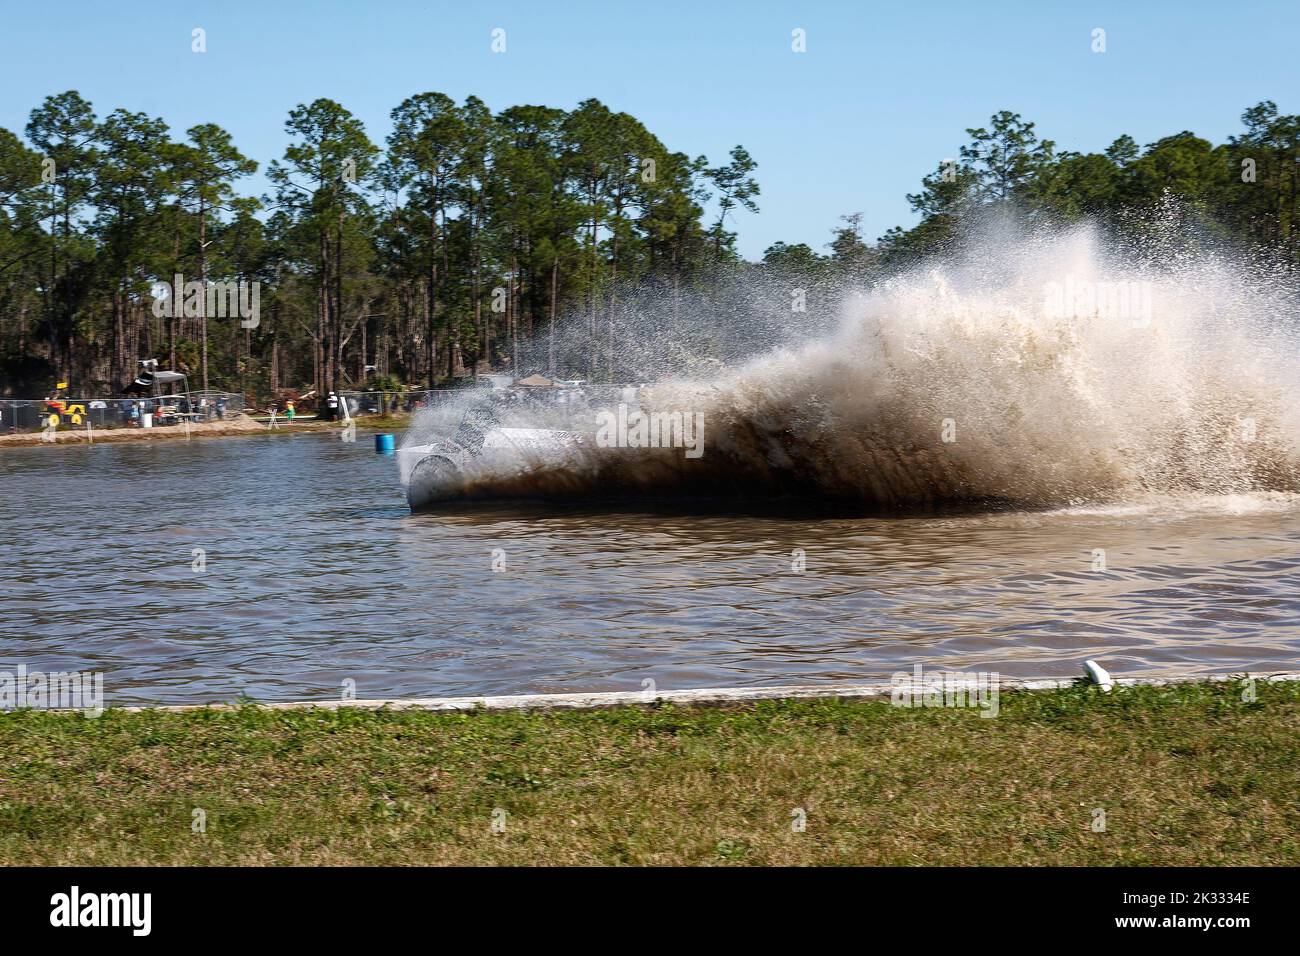 swamp buggy racing, very large water spray, action, contest, motion, sport, fast, Florida Sports Park, Naples, FL Stock Photo